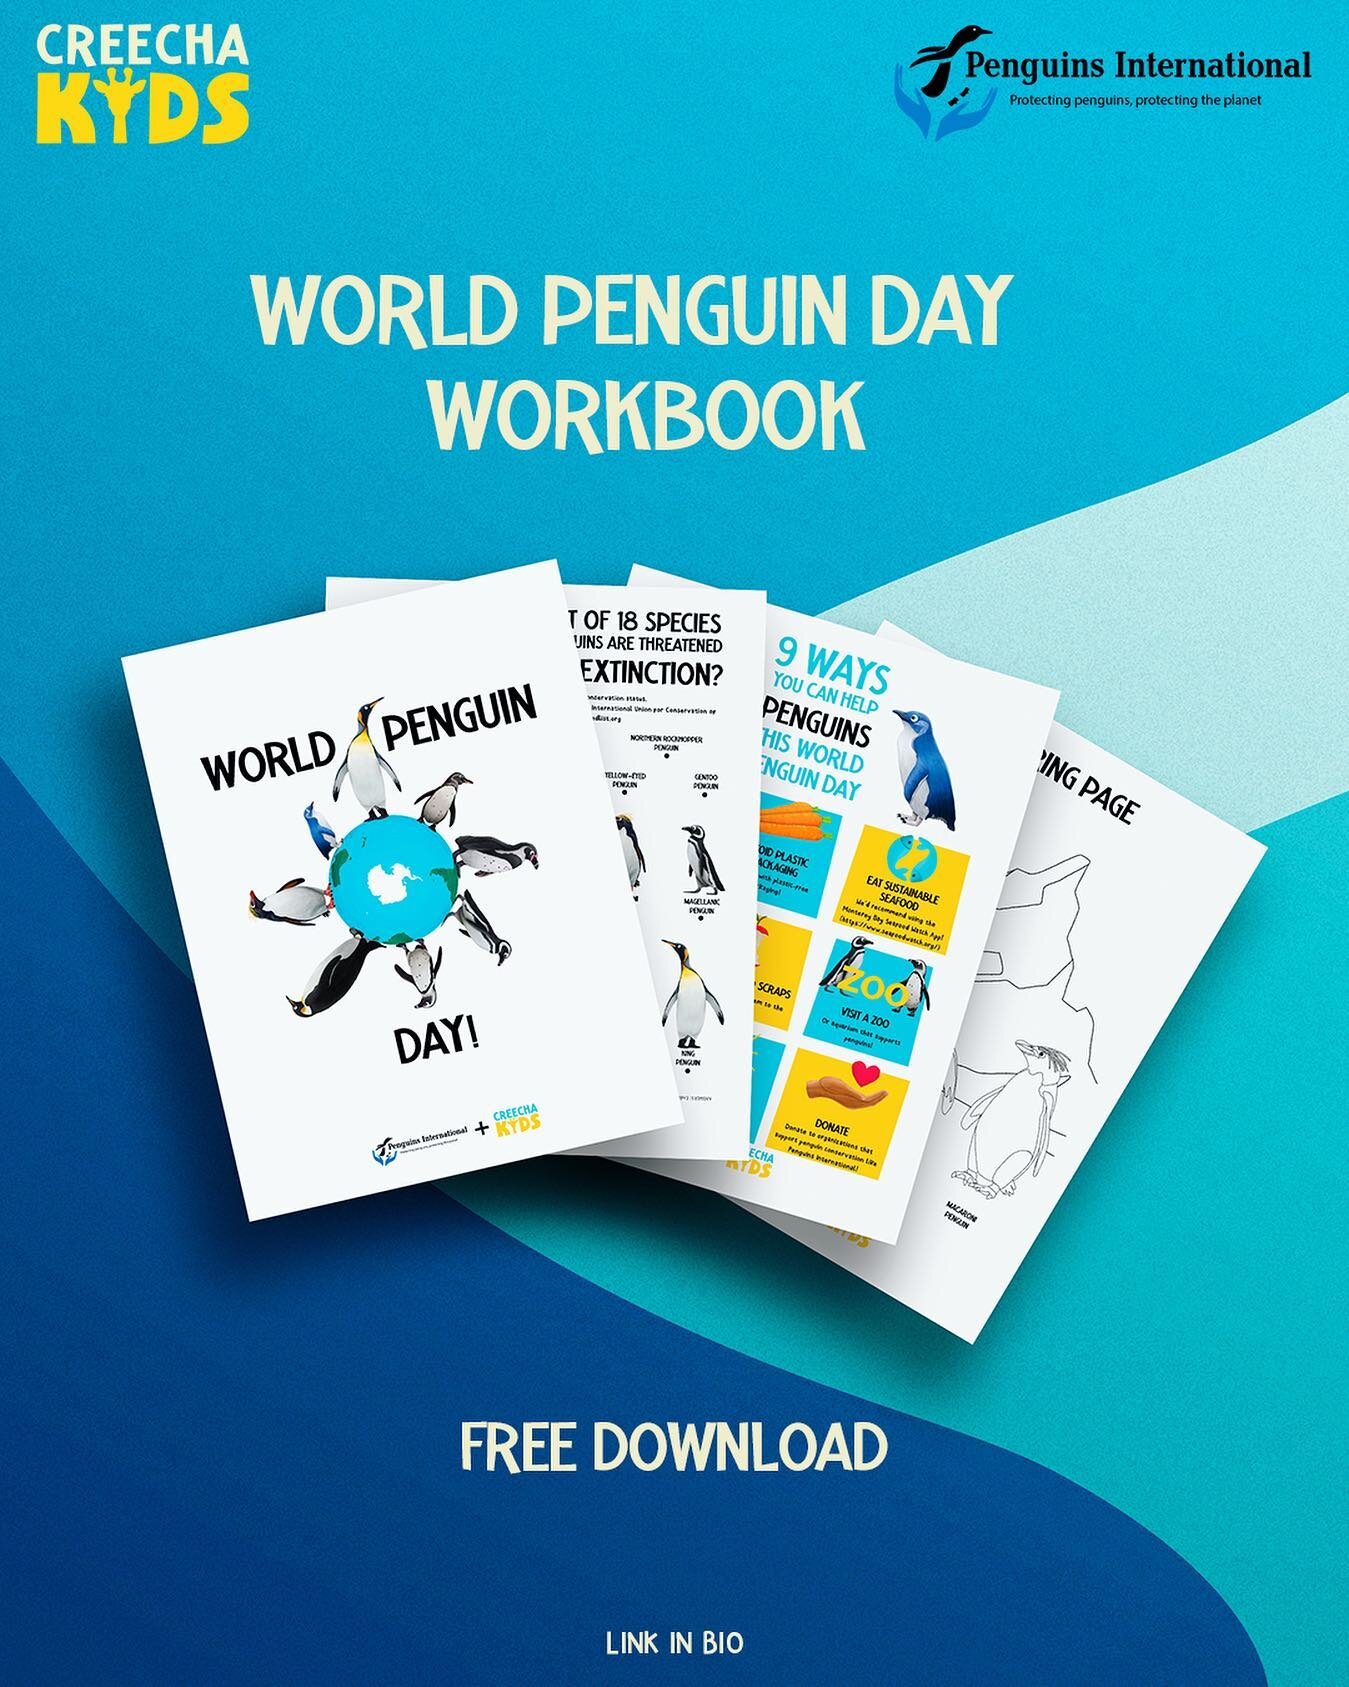 Happy World Penguin Day! Today is all about spreading penguin awareness, so please tag or share this post to do your part.

We have collaborated again with Katie Propp ( @wildlifekatie ) Conservation Education Manager at @penguins_international to cr